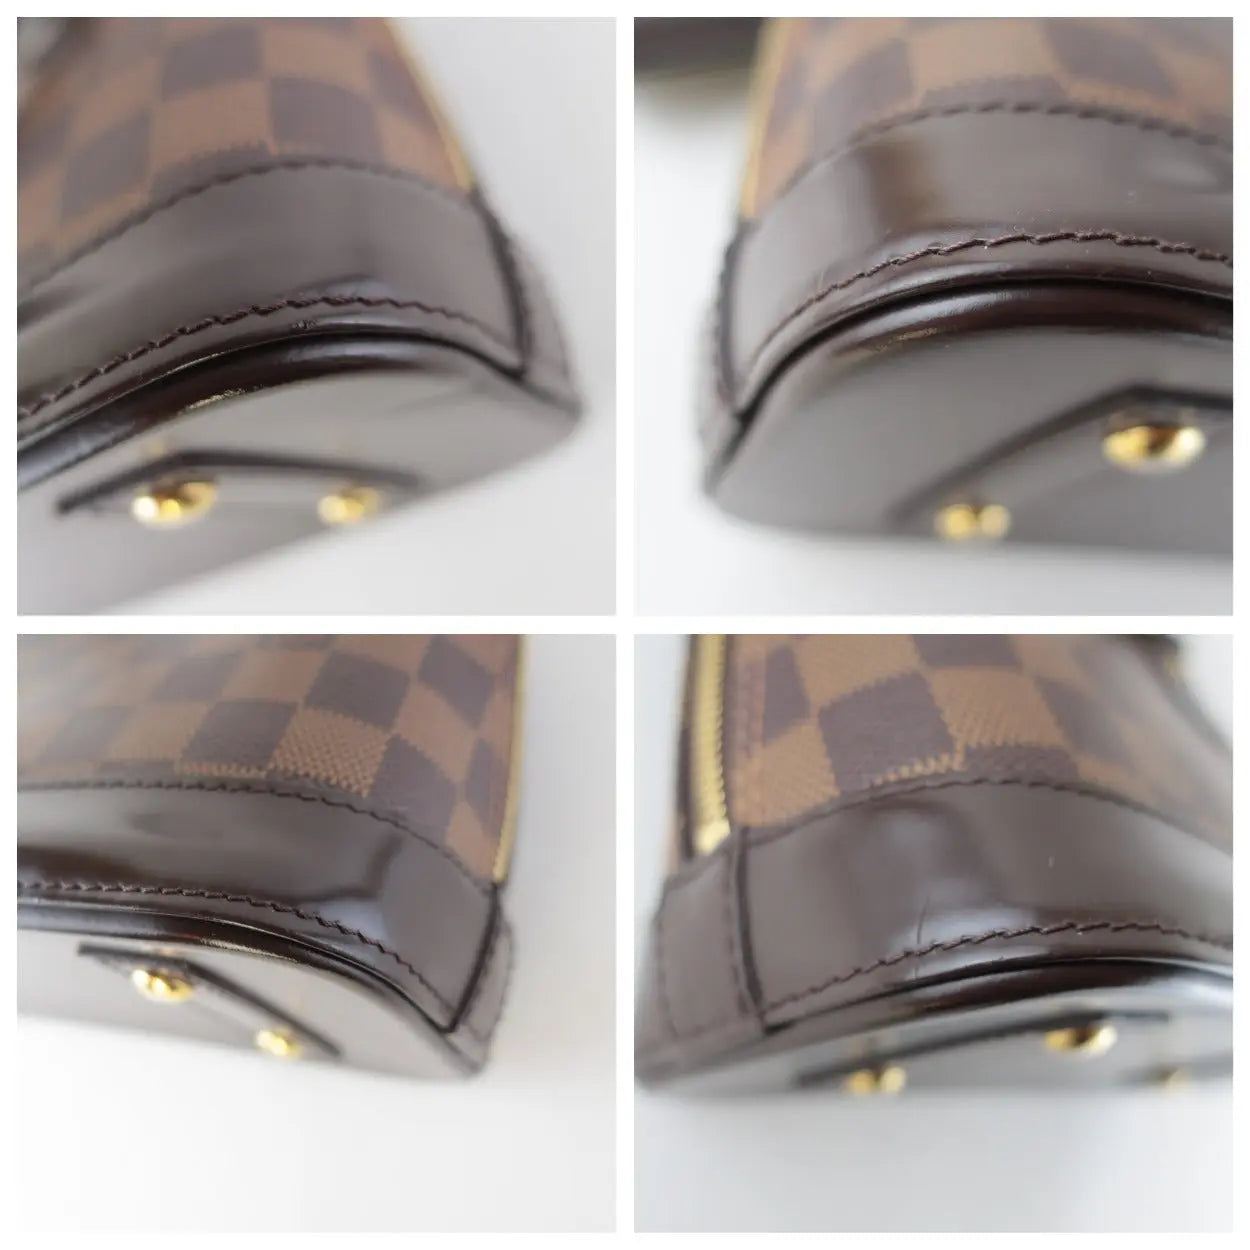 Louis Vuitton Alma BB Damier Ebene Pros & Cons MOD SHOTS All Angles+What's  Inside My Bag